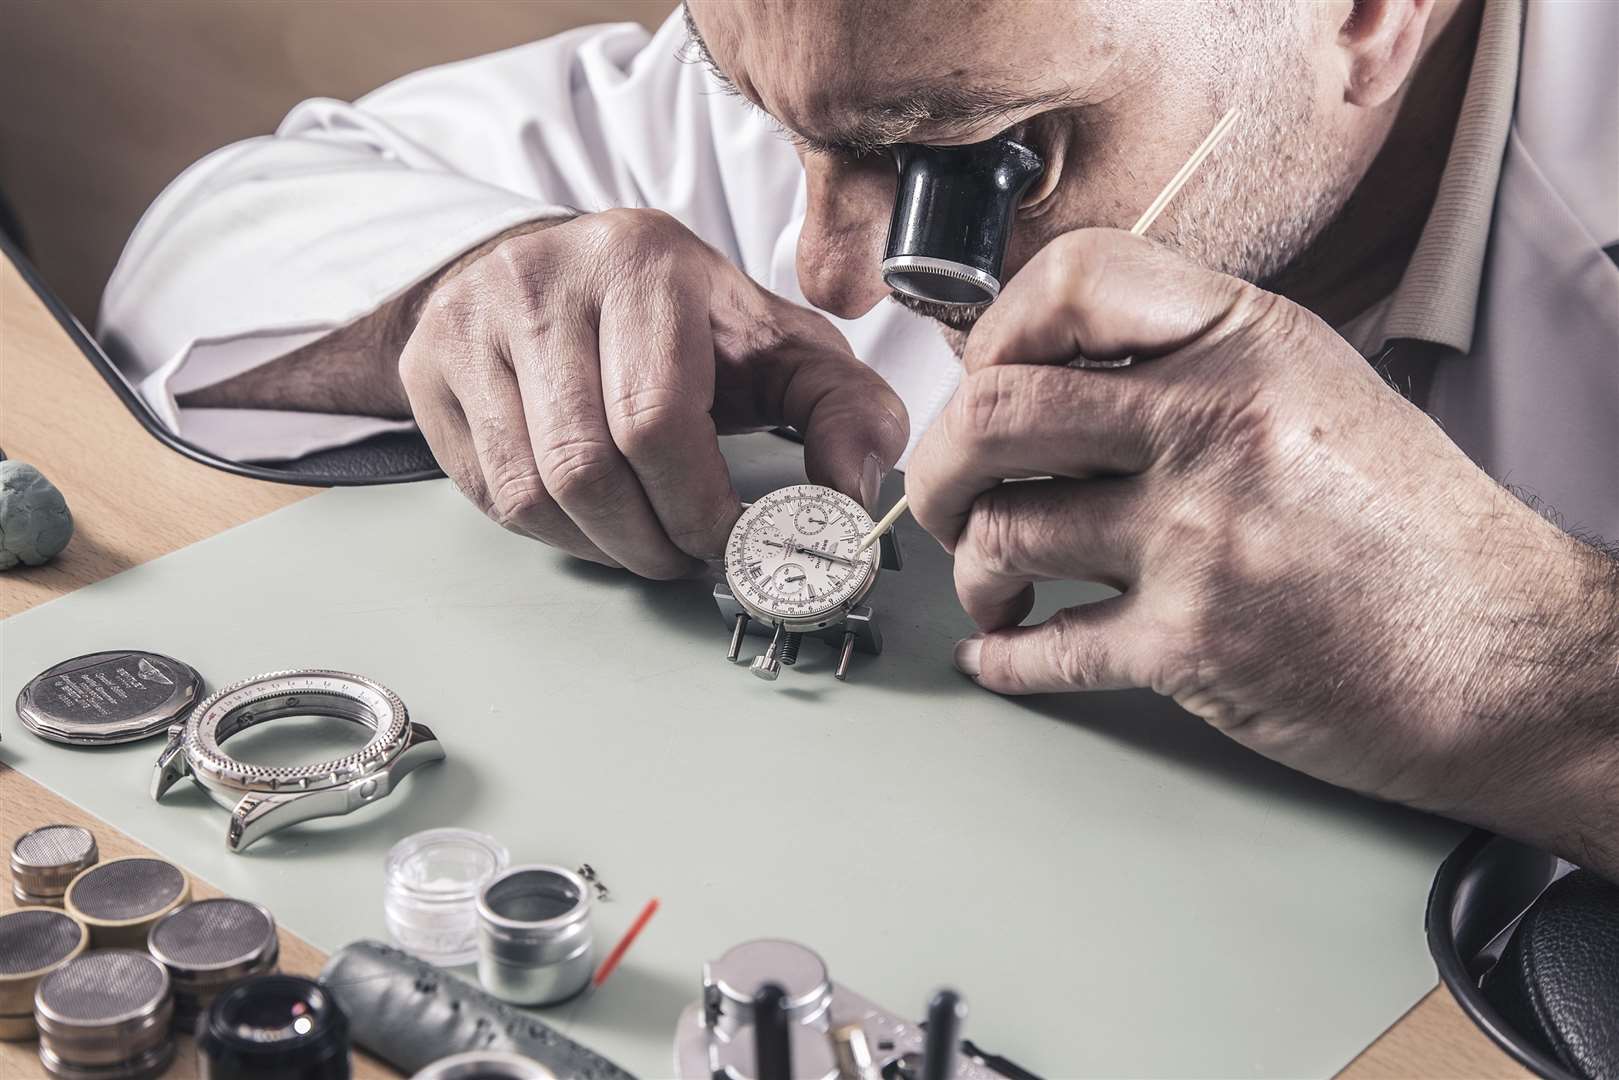 Watchfinder, the luxury watchseller and servicer, is based in Maidstone